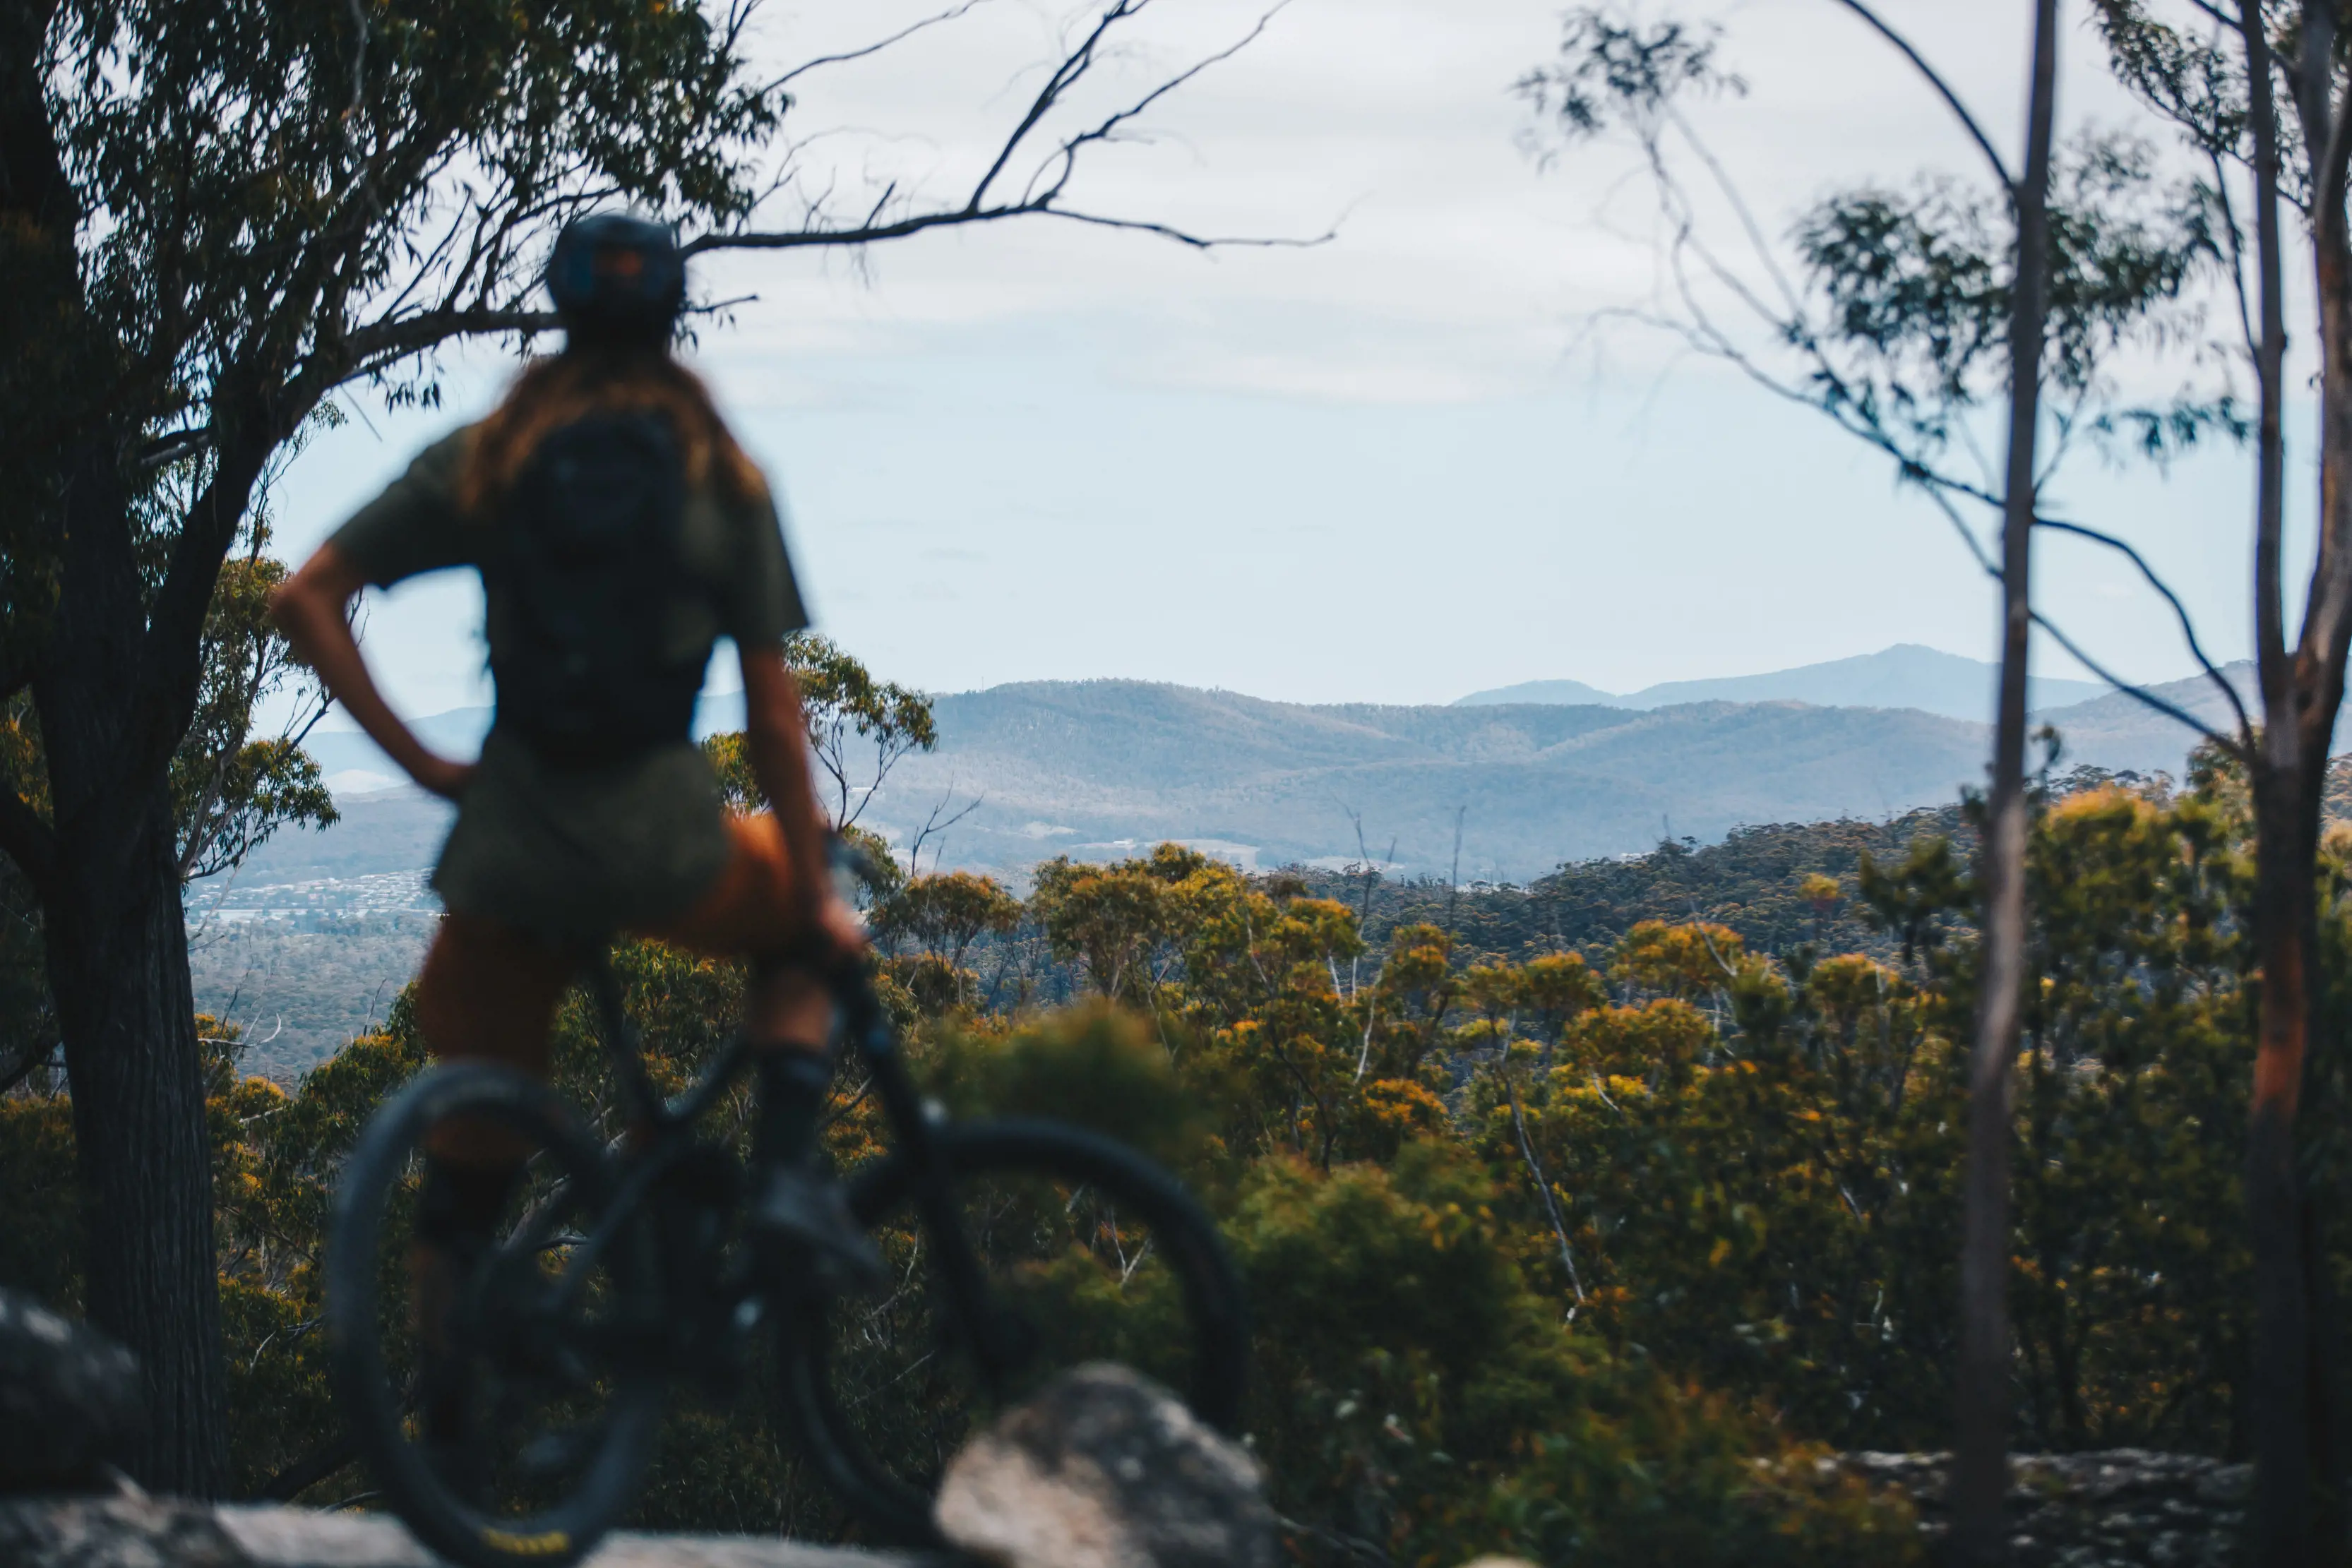 A cyclist stops and looks out at the view from St Helens Mountain Bike Trails